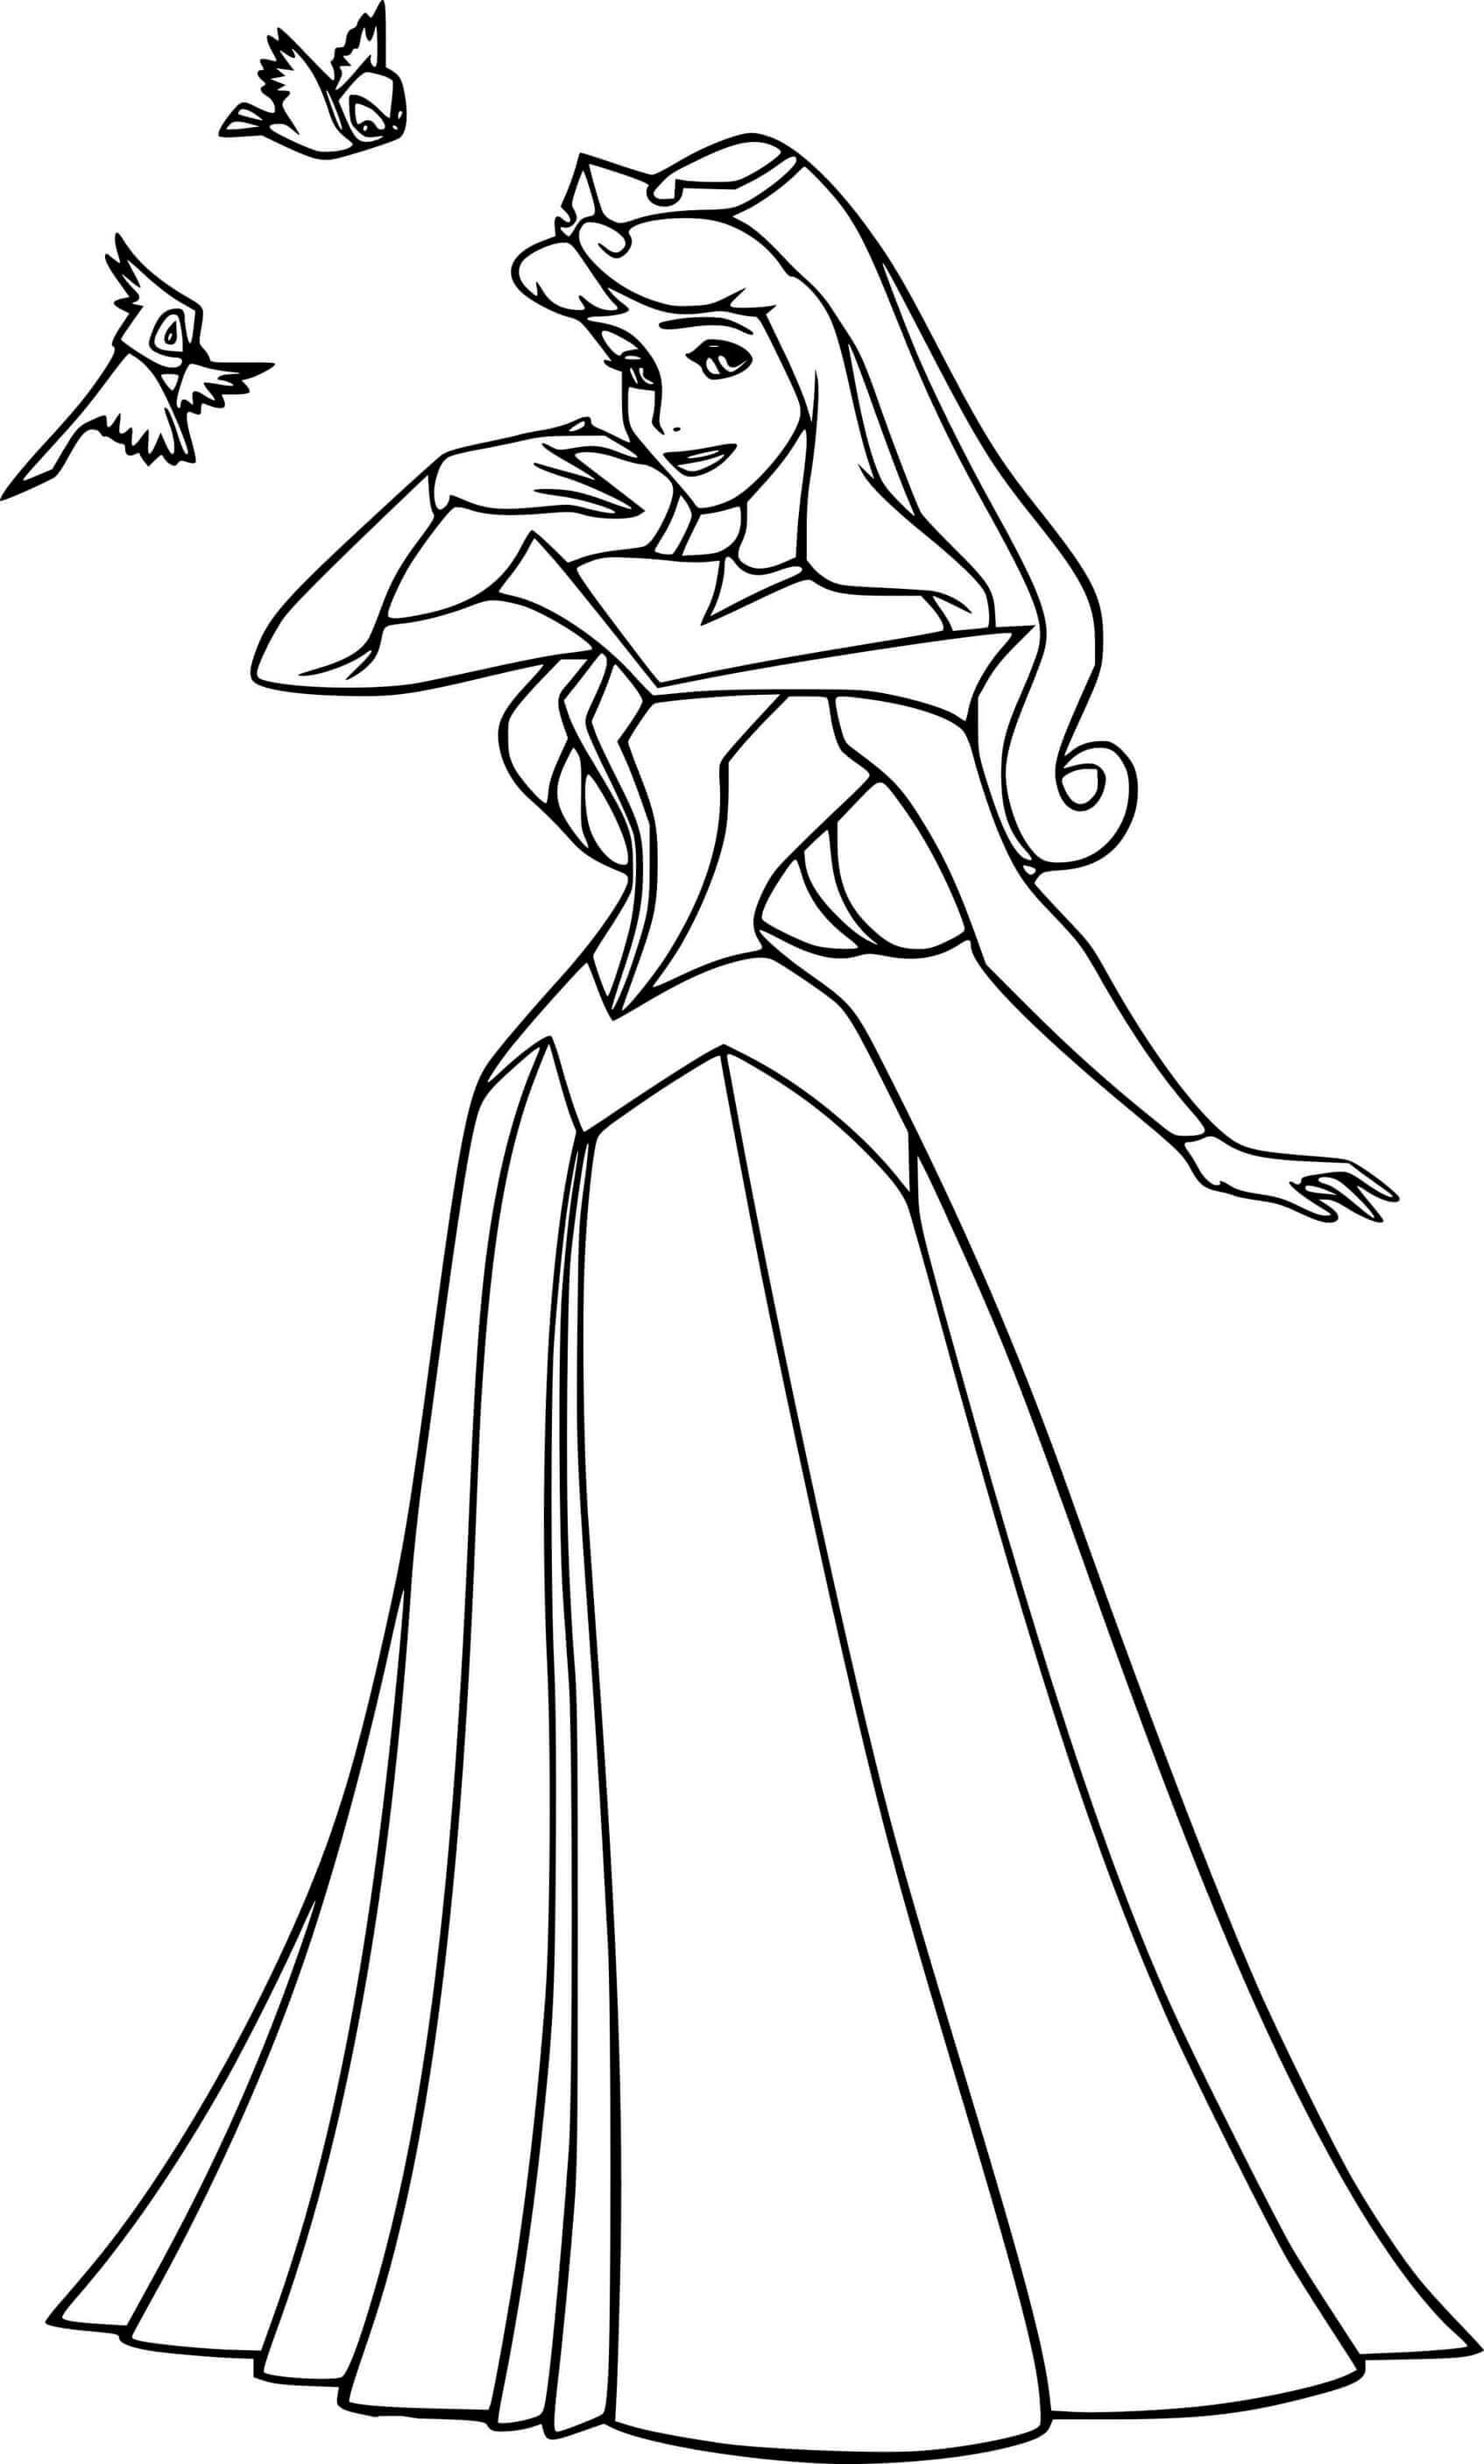 Princess Aurora And Two Birds Coloring Pages   Coloring Cool